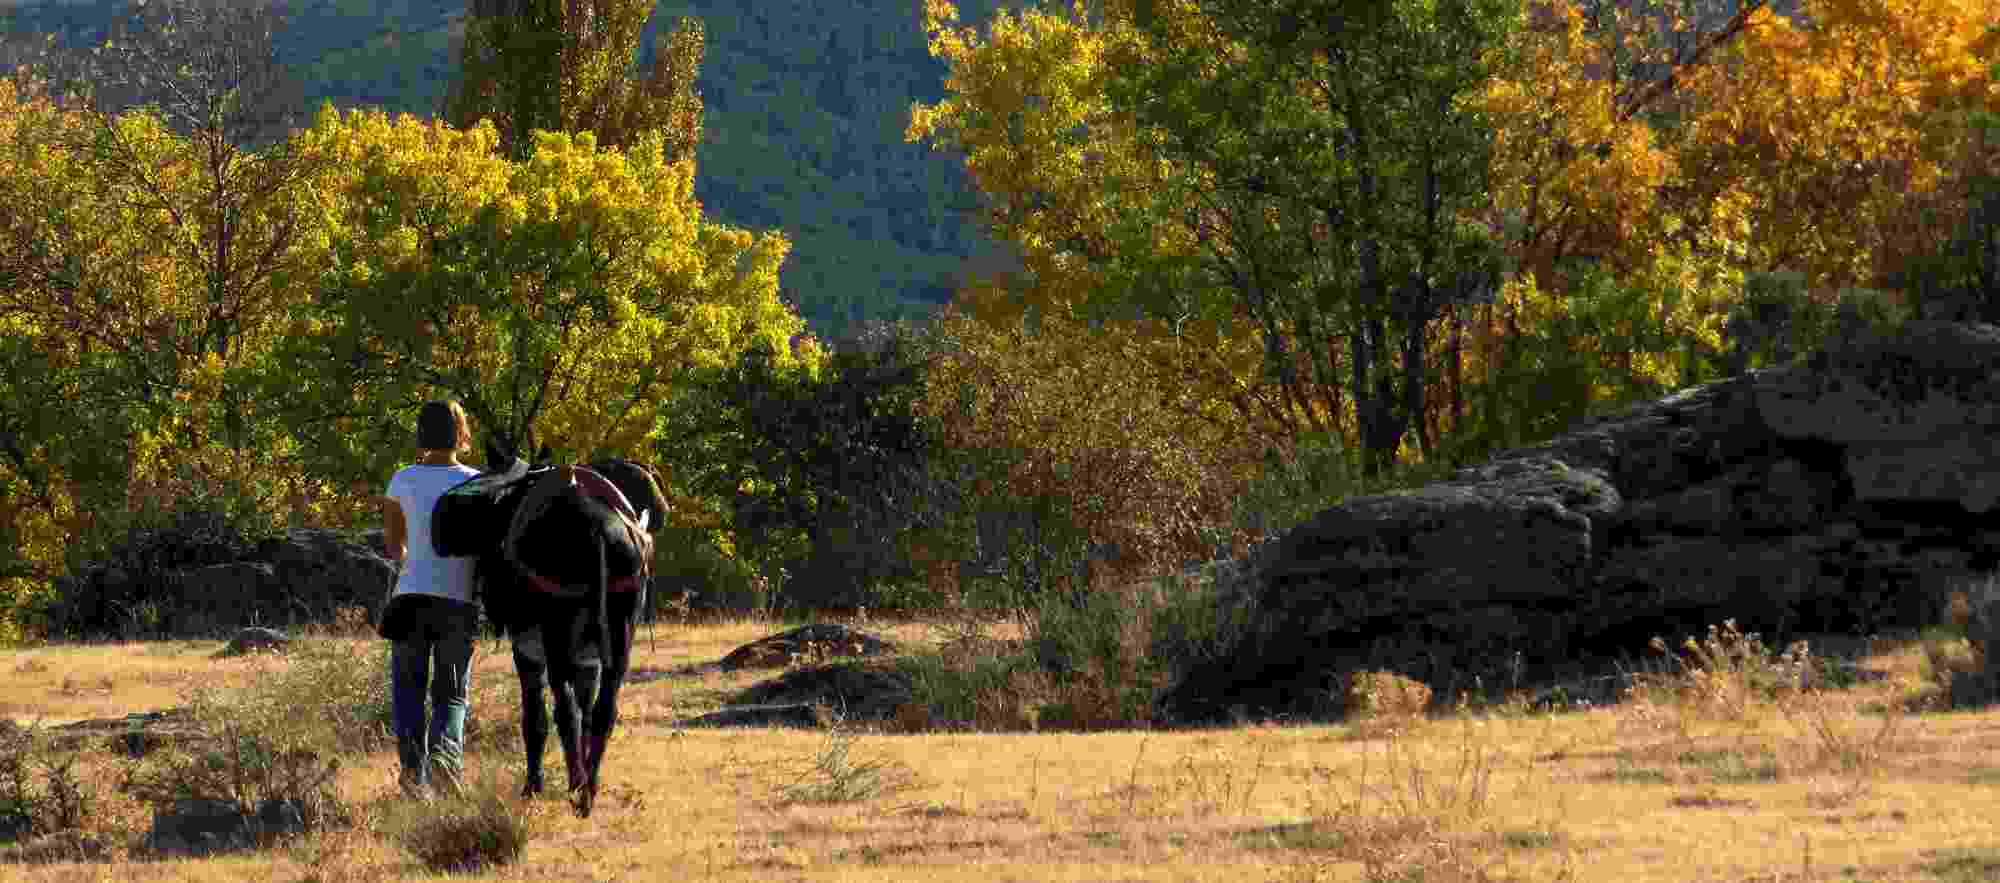 Tranquil walk with a donkey in Segovia, Spain